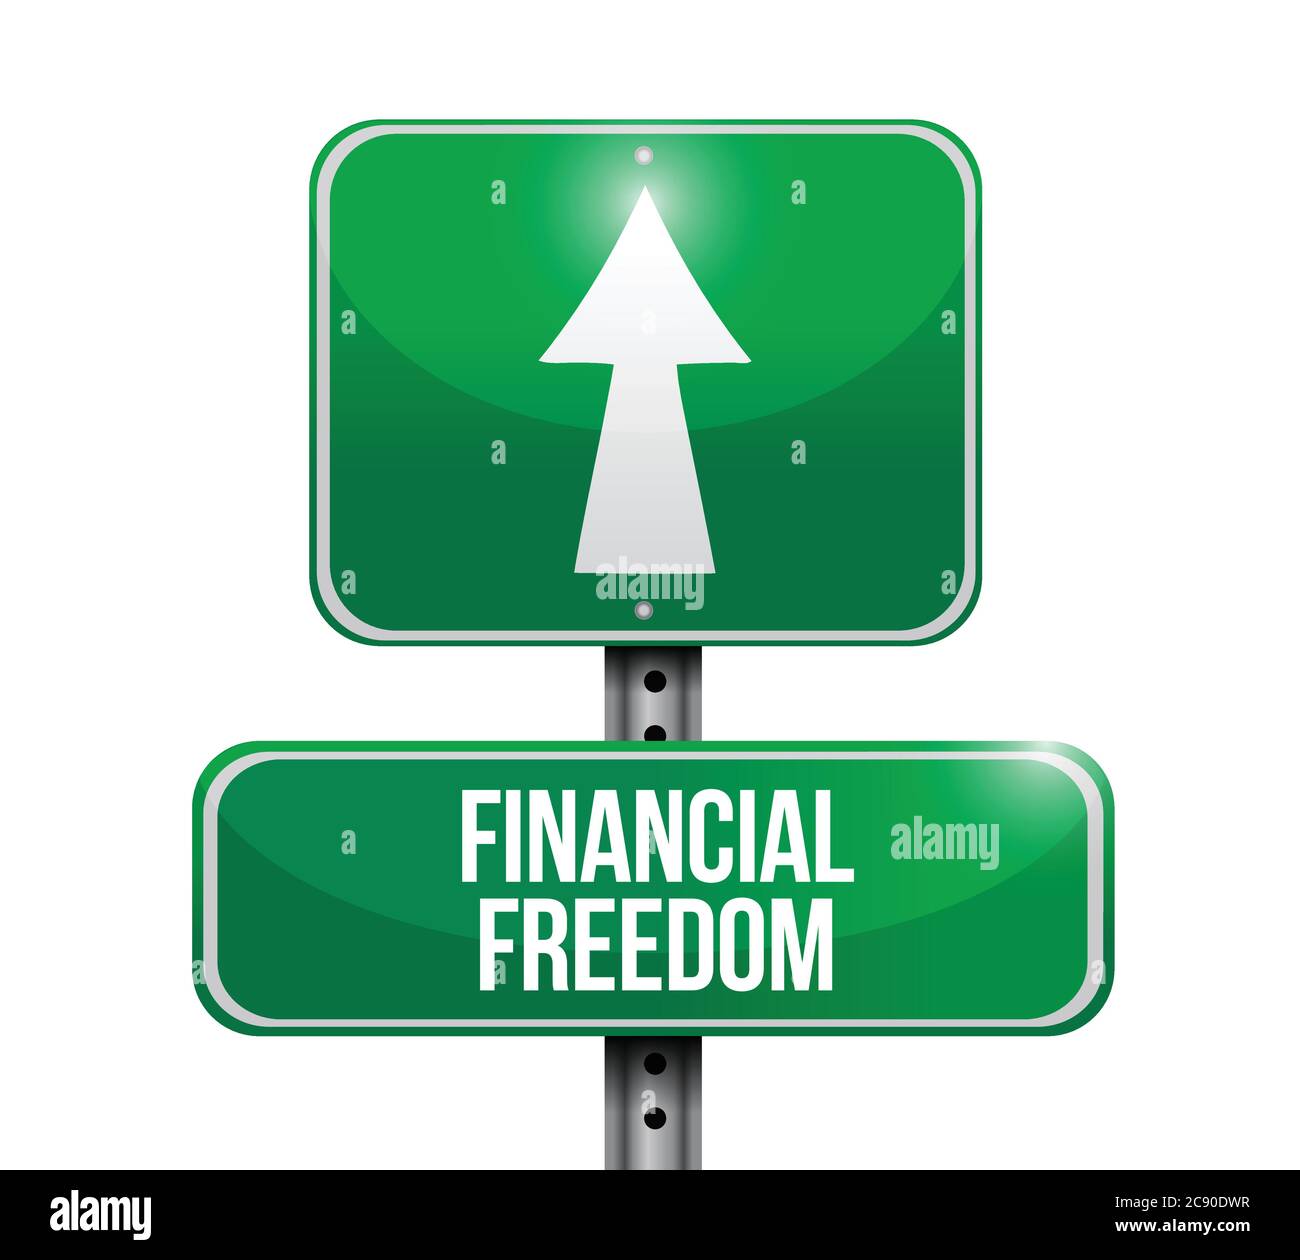 Financial freedom sign illustration design over a white background Stock Vector